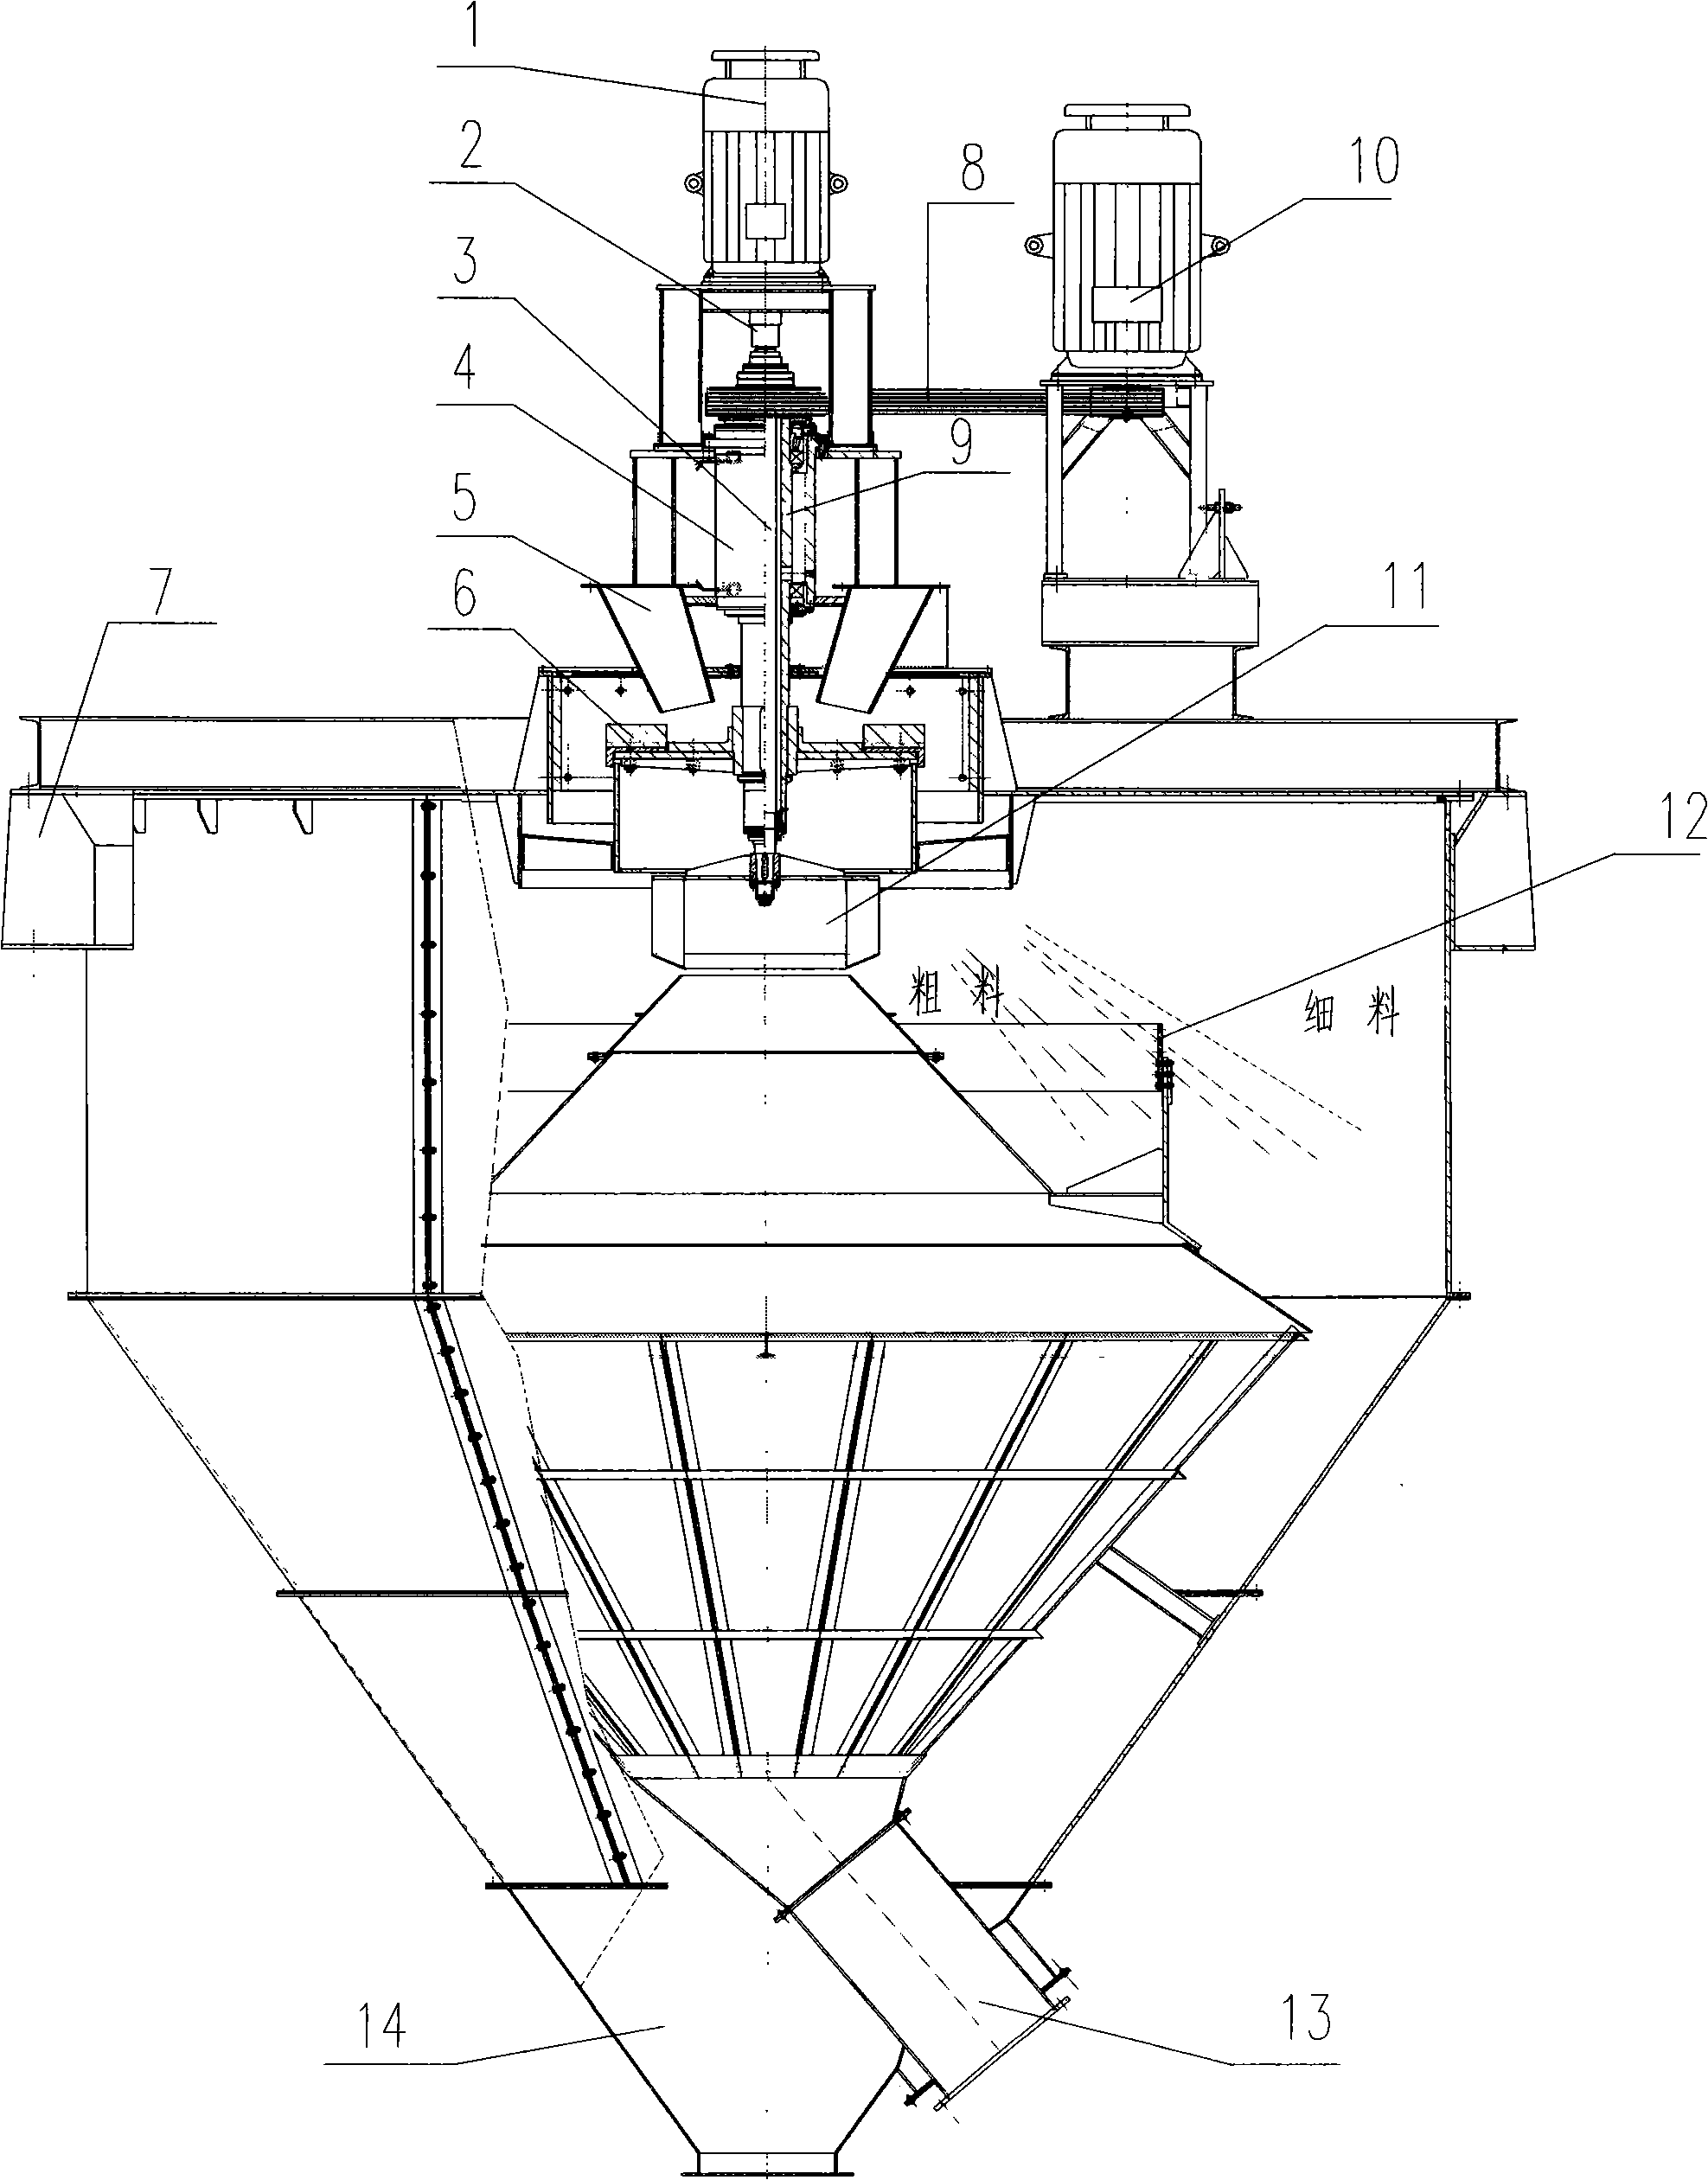 Apparatus for breaking up and classifying cake material